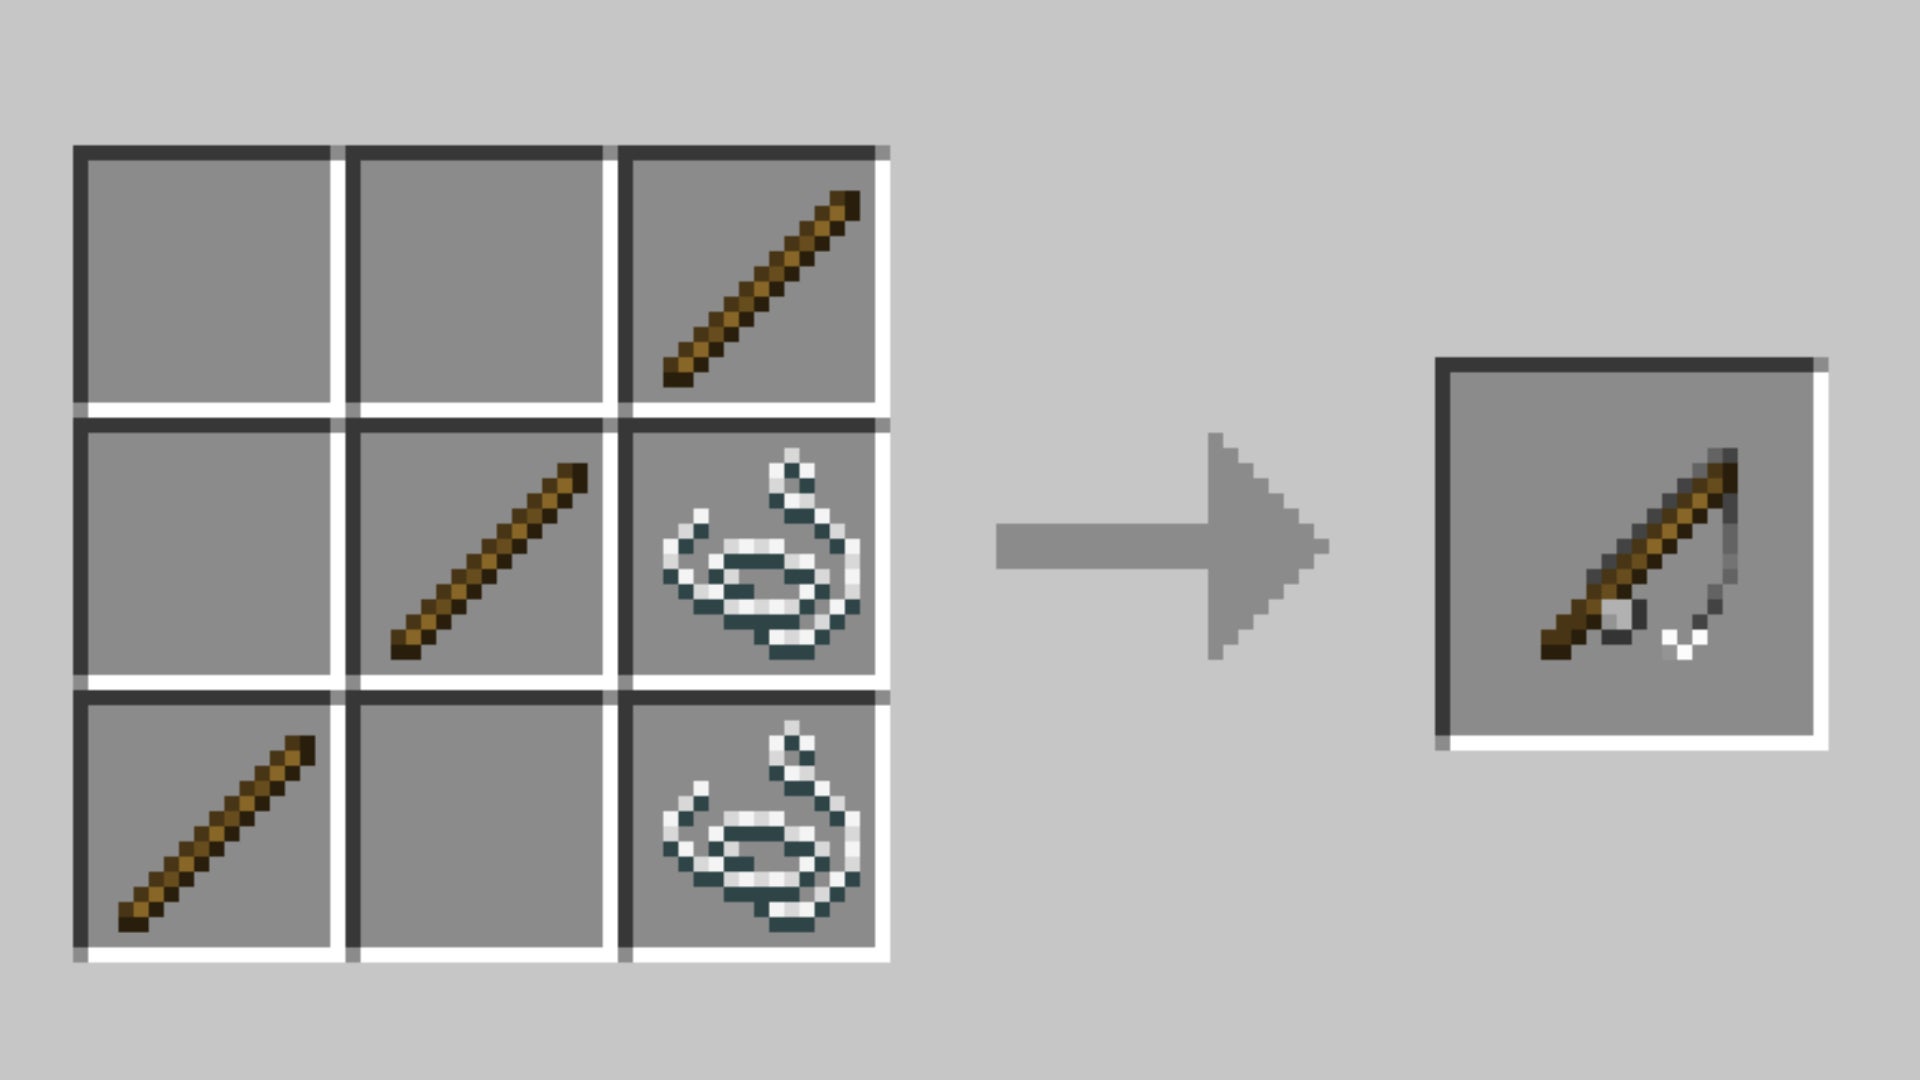 The recipe for a fishing rod in Minecraft.